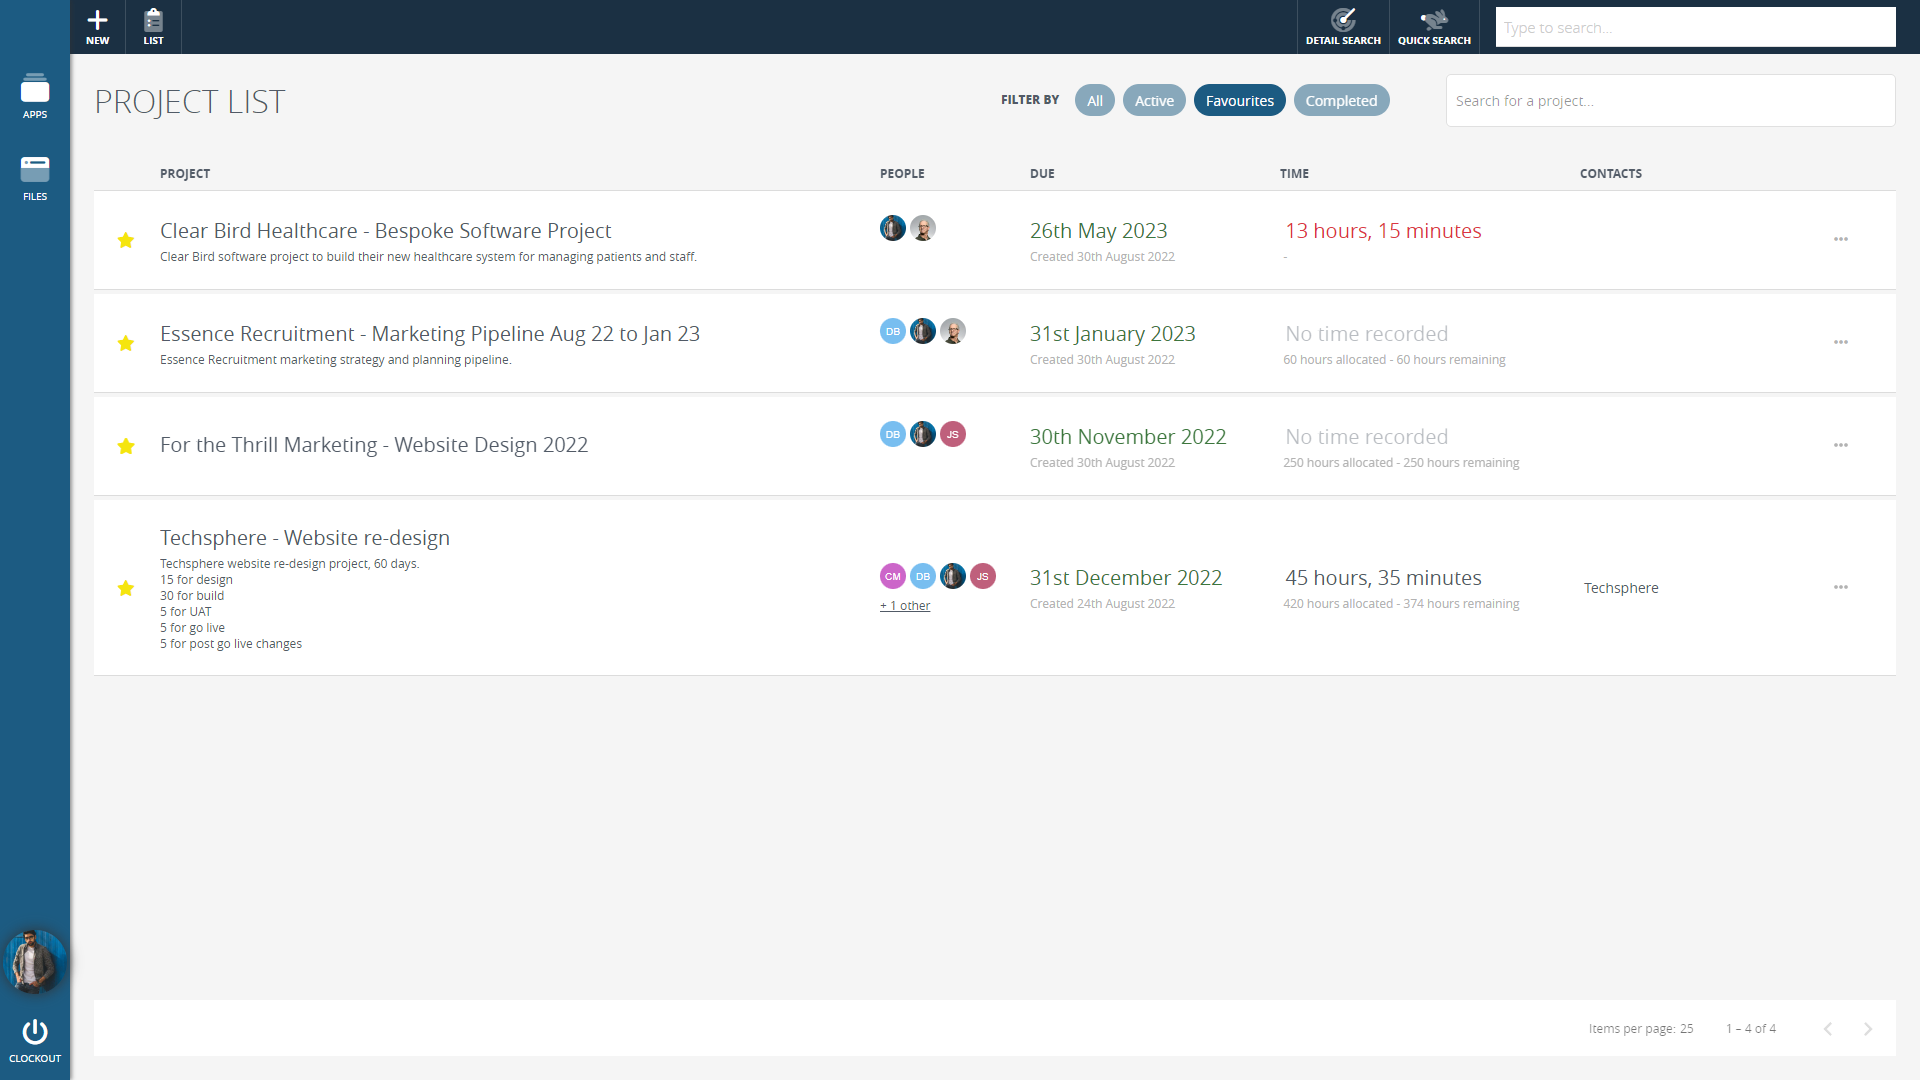 An image of the new project list view